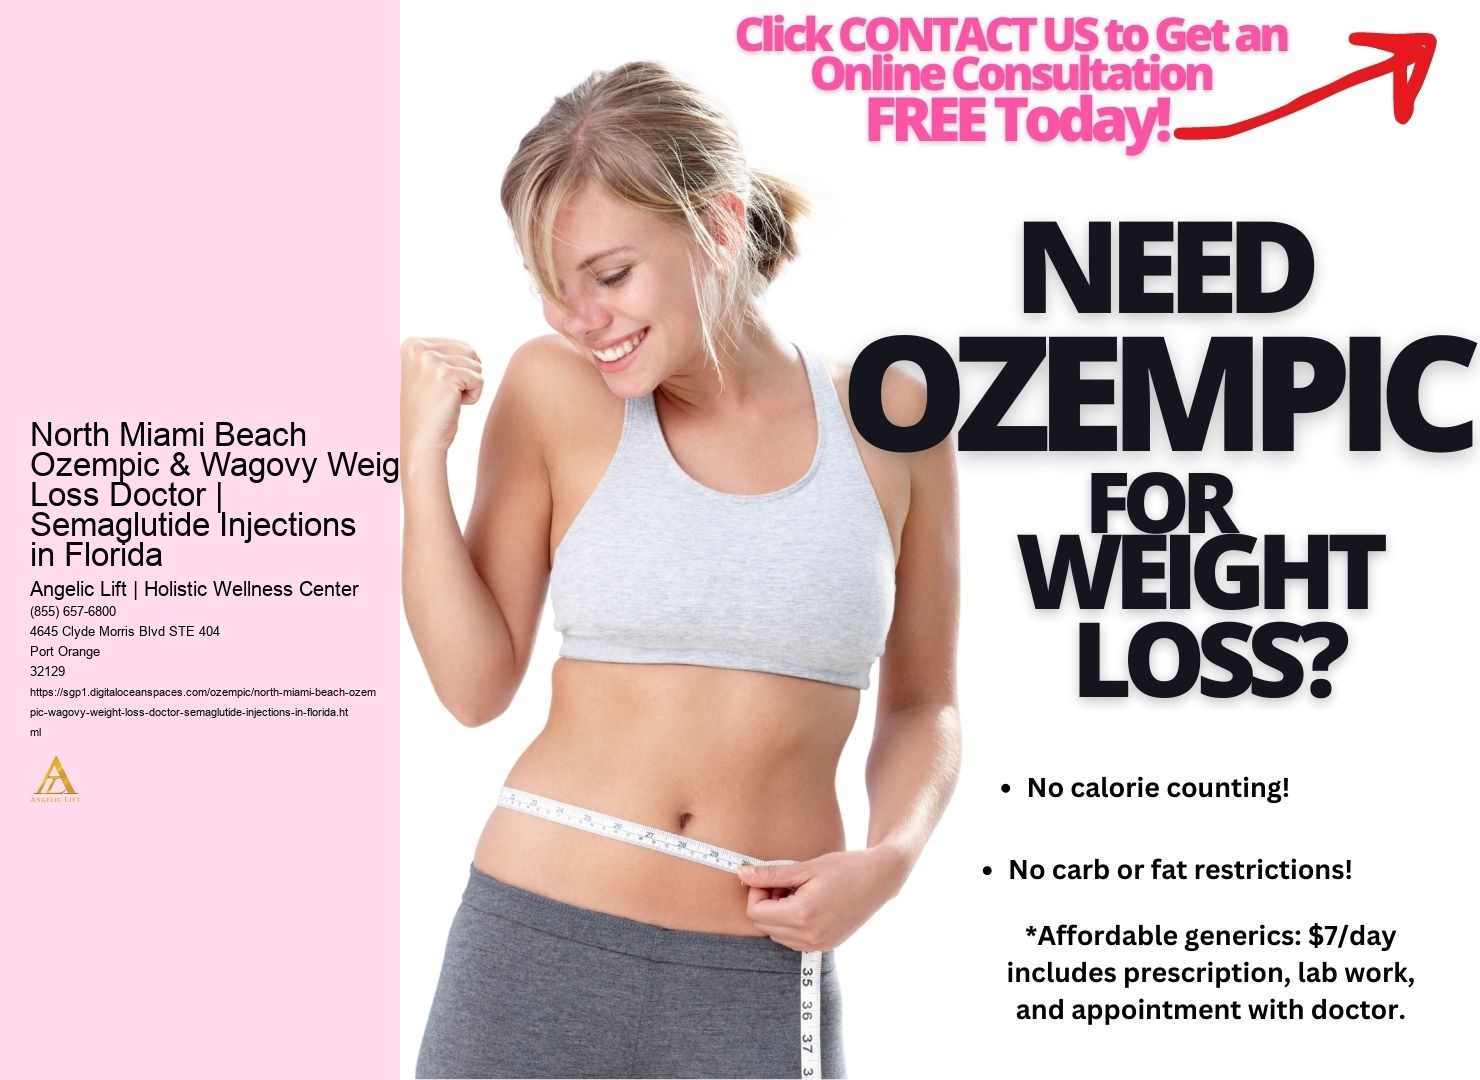 North Miami Beach Ozempic & Wagovy Weight Loss Doctor | Semaglutide Injections in Florida